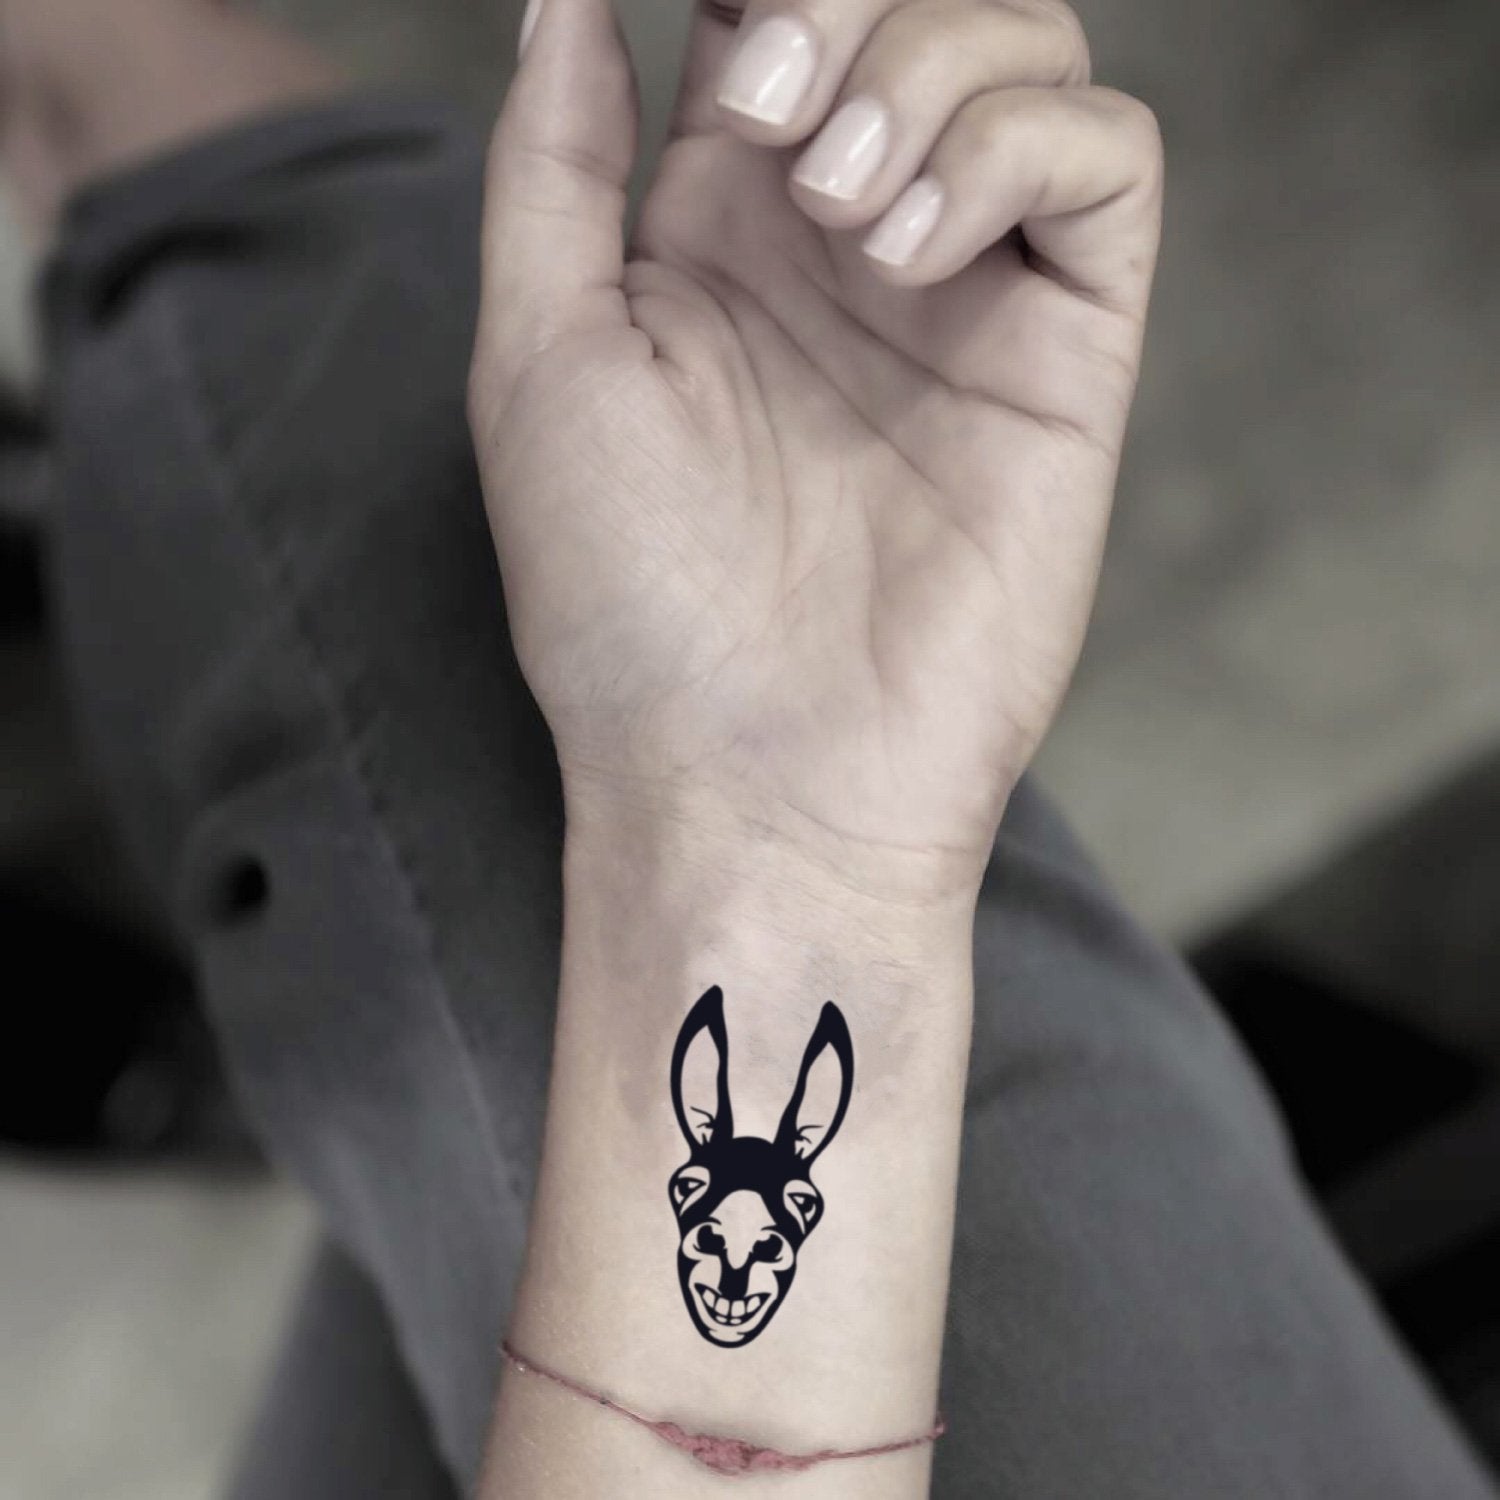 31 Small Tattoos For Men You Need To See Before Getting Inked